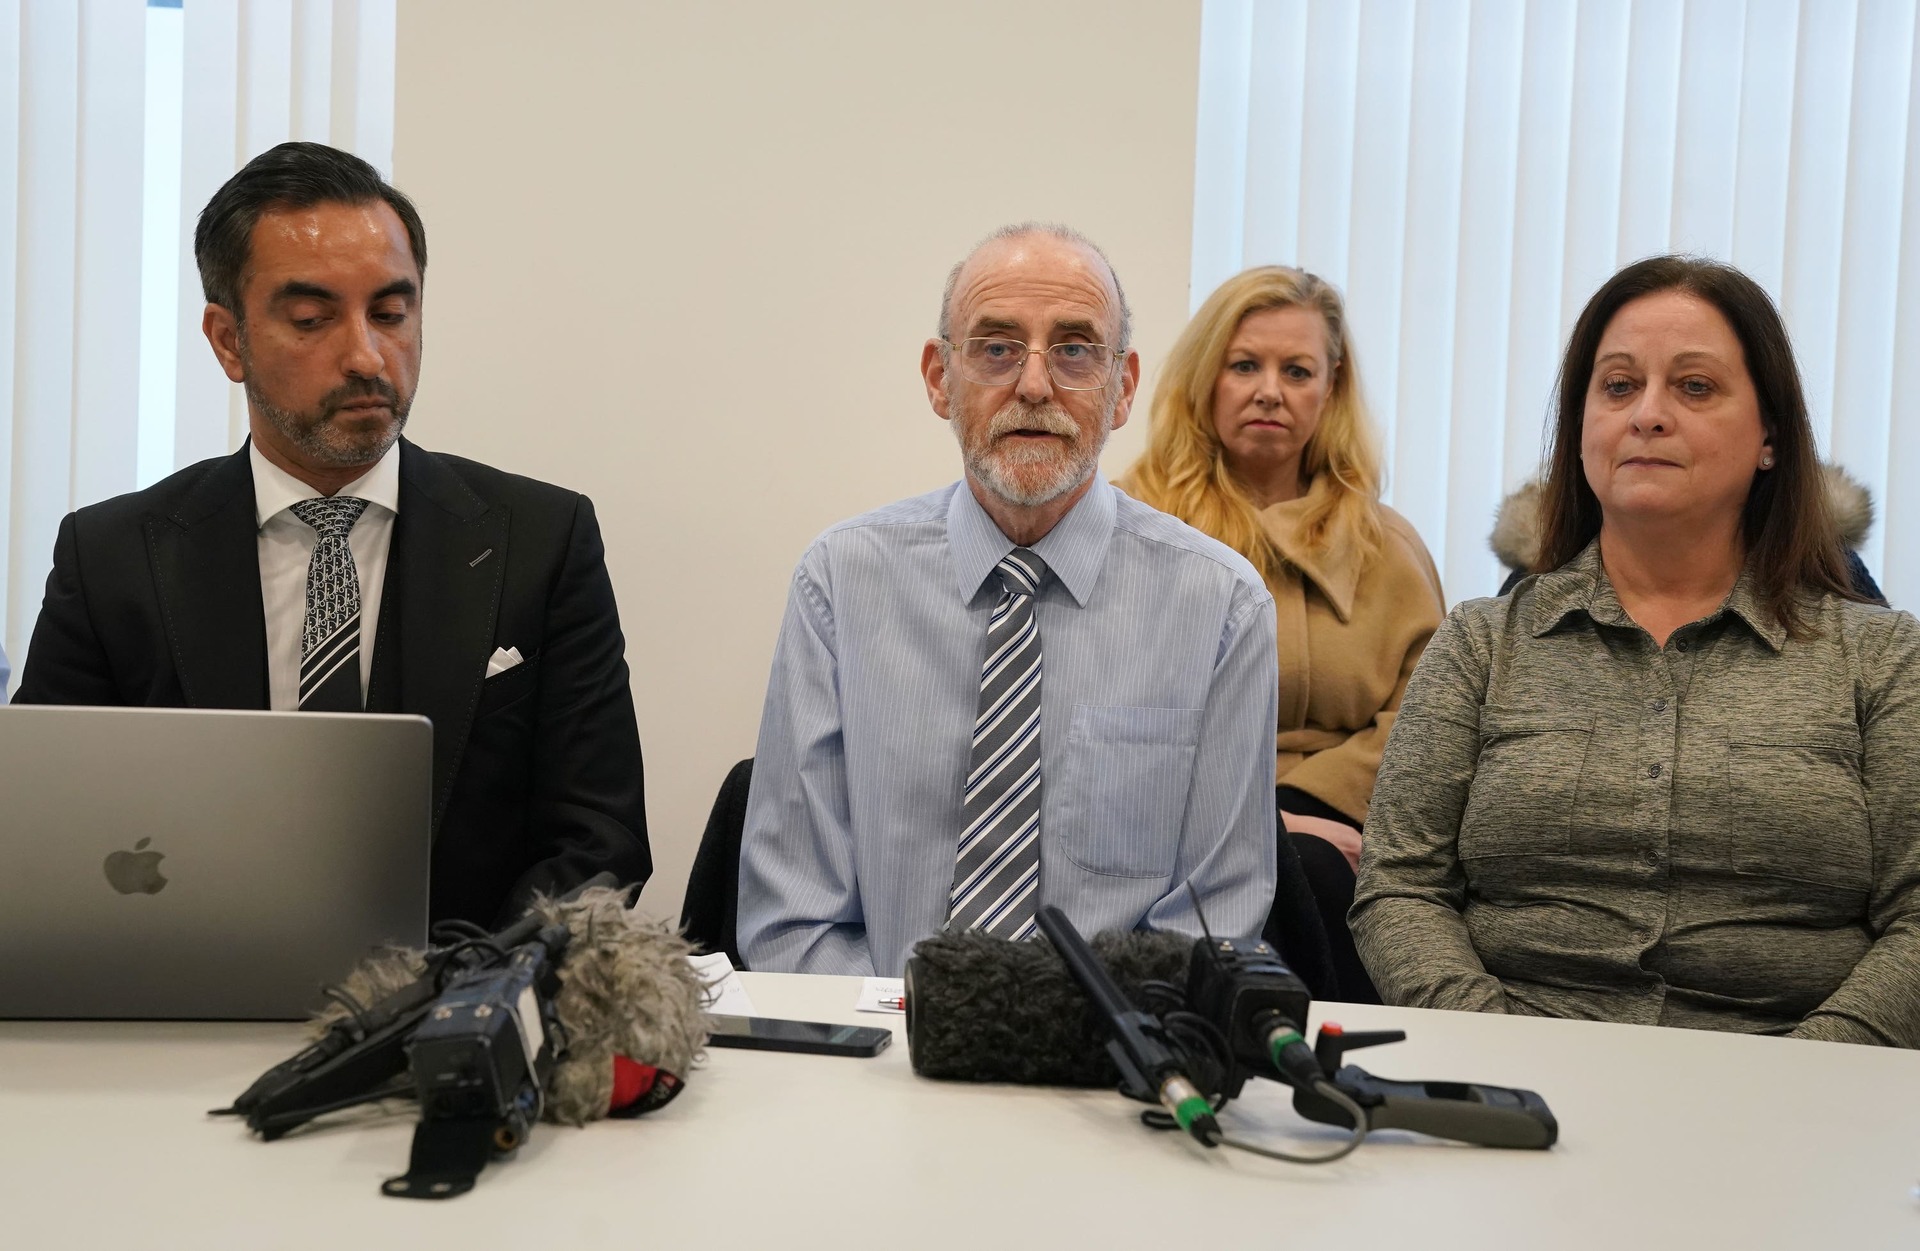 Lawyer Aamer Anwar alongside Alan Wightman, centre, and Helen Lee Keenan, right, from the Scottish members of the Covid-19 Bereaved Families for Justice group.